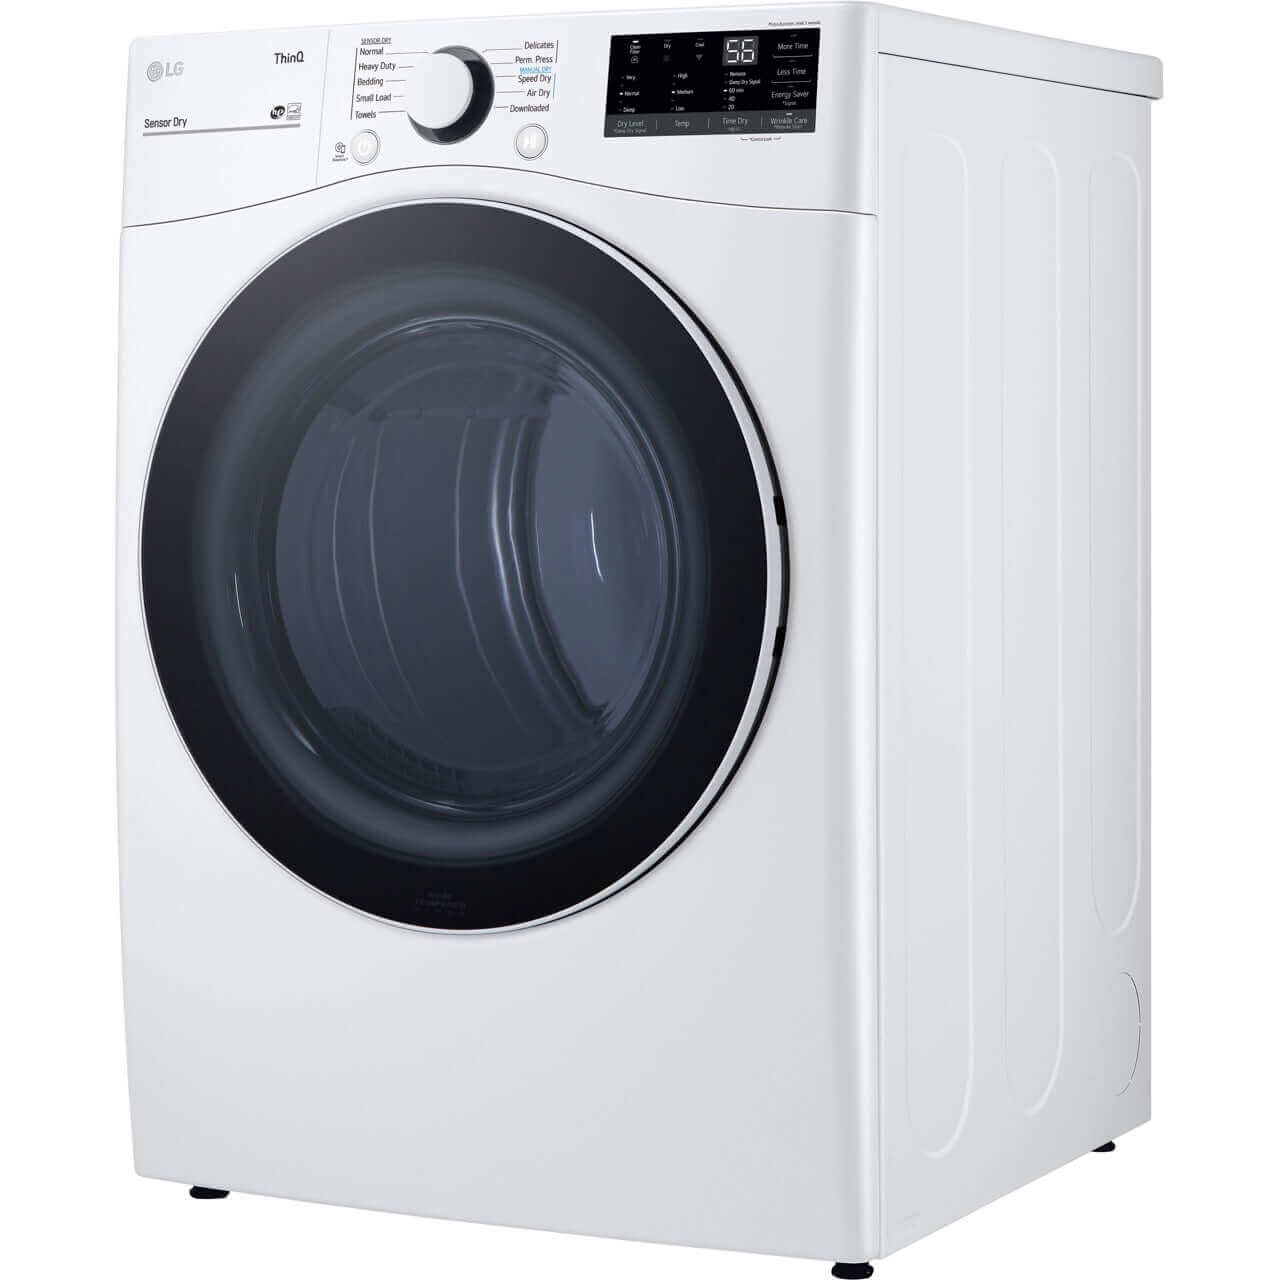 LG 27 In. 7.4-Cu. Ft. Front Load Electric Dryer with Built-In Intelligence in White (DLE3600W)